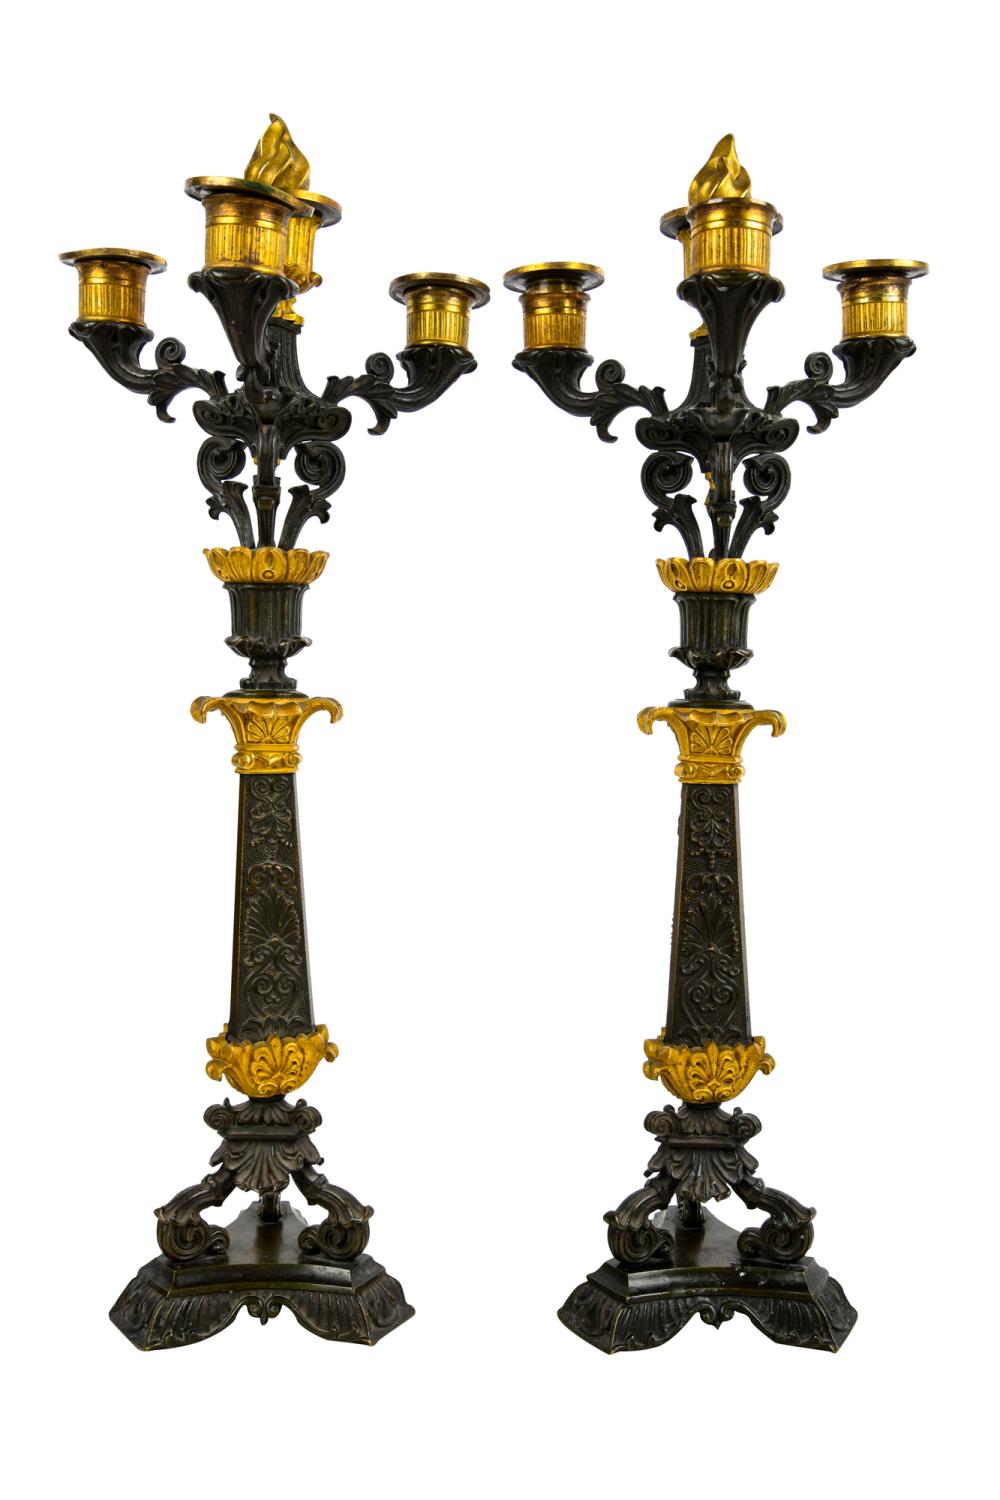 PAIR OF FRENCH GILT & PATINATED